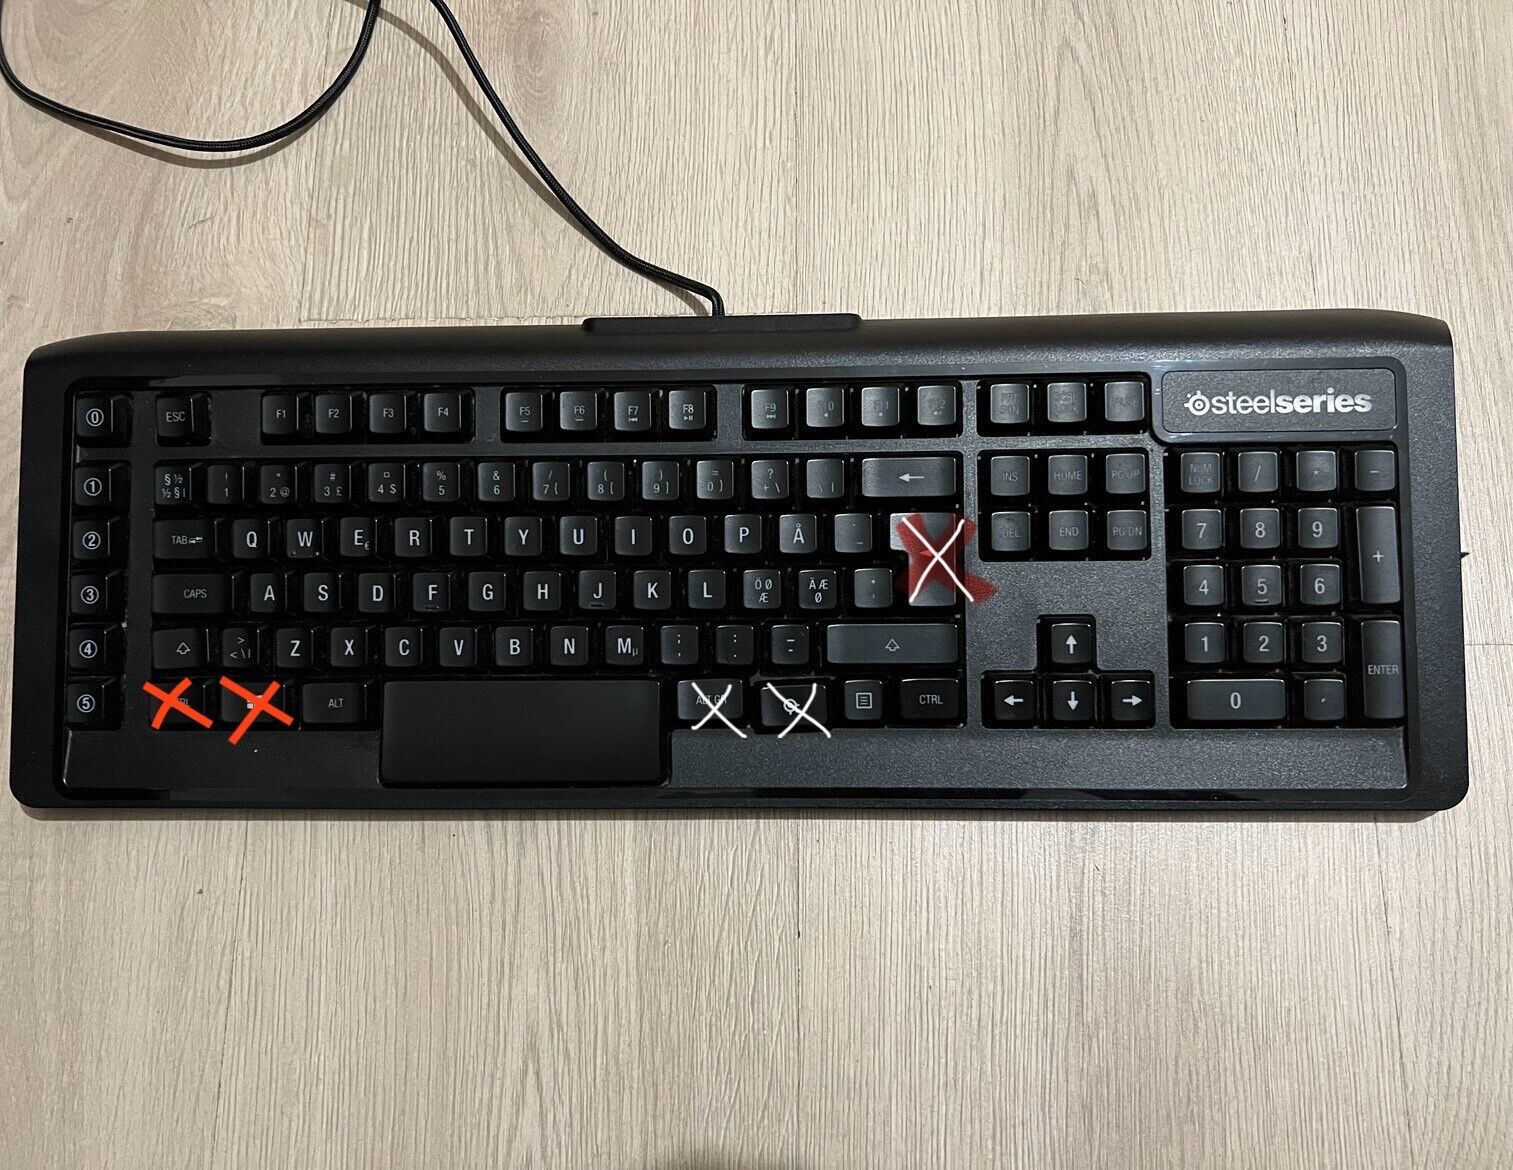 SteelSeries Apex M800 Keyboard | Black | Rare Keycaps | FOR PARTS